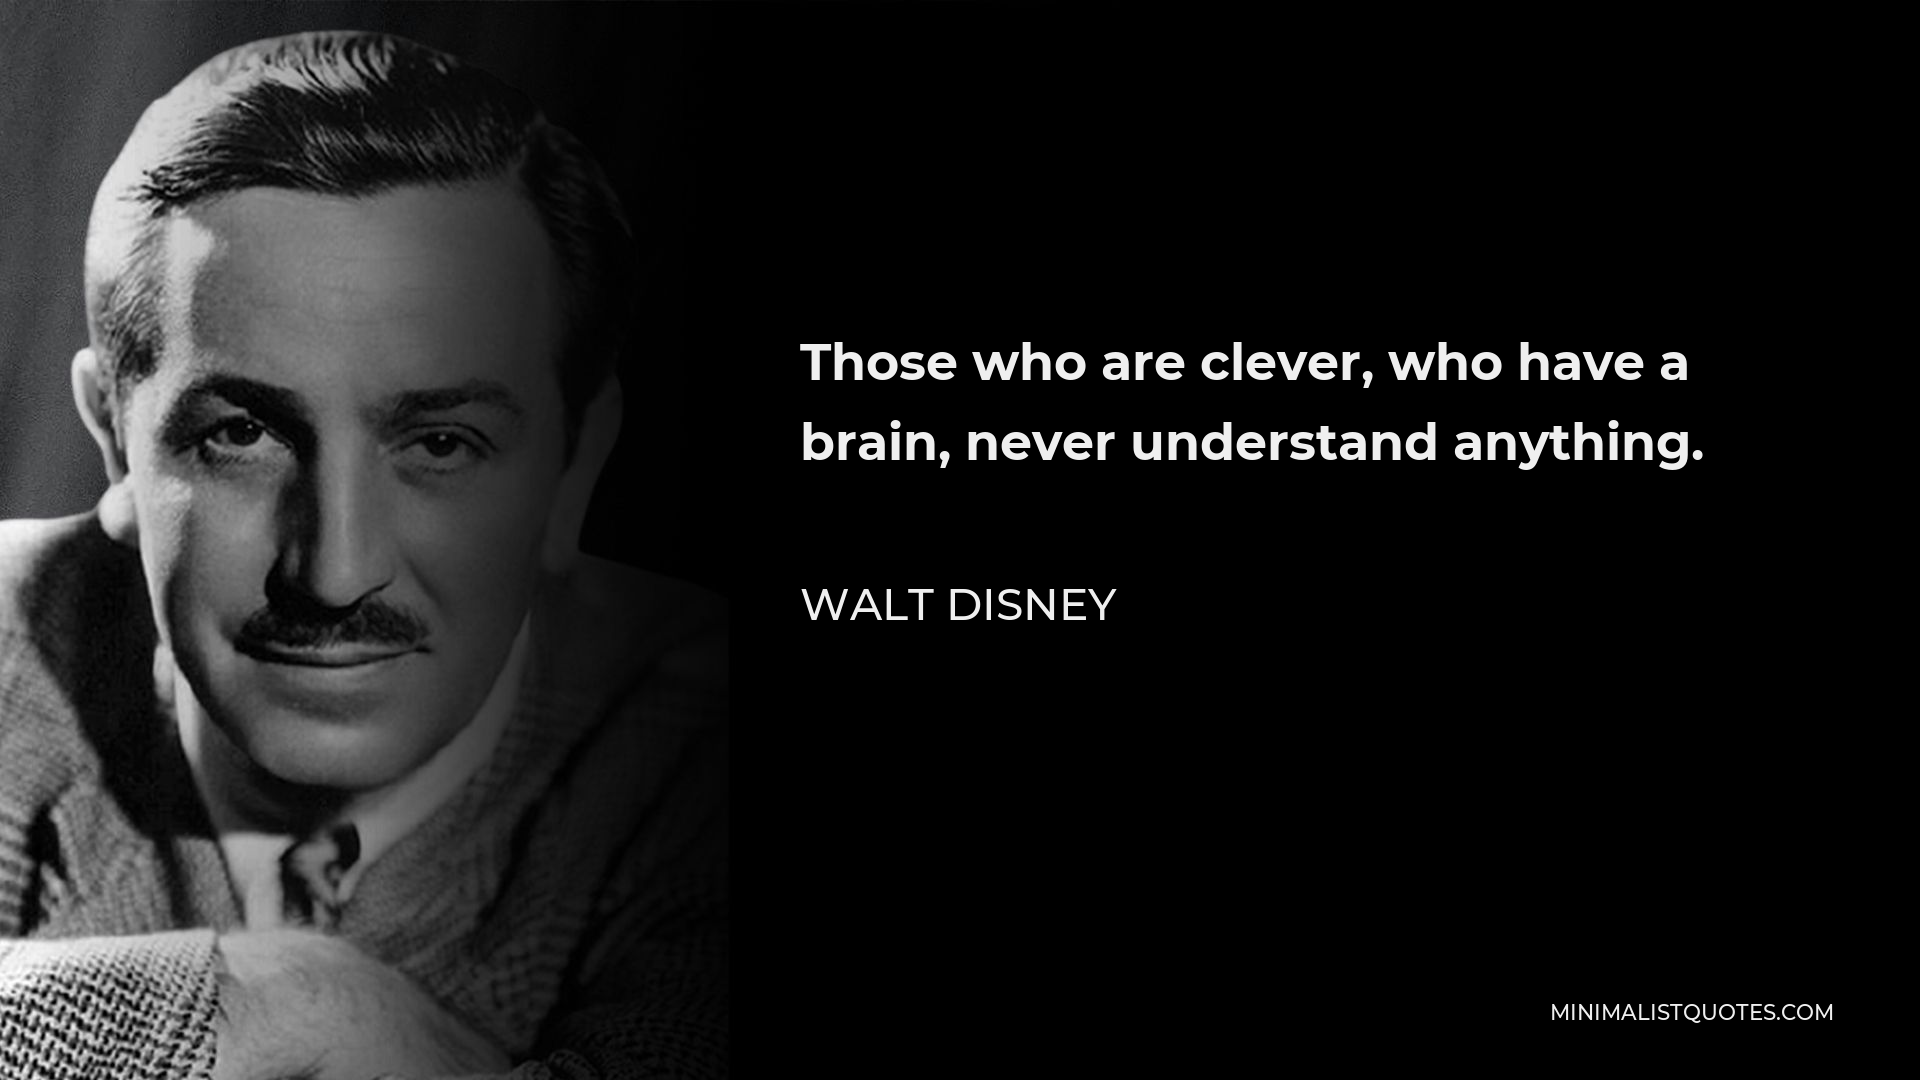 Walt Disney Quote - Those who are clever, who have a brain, never understand anything.